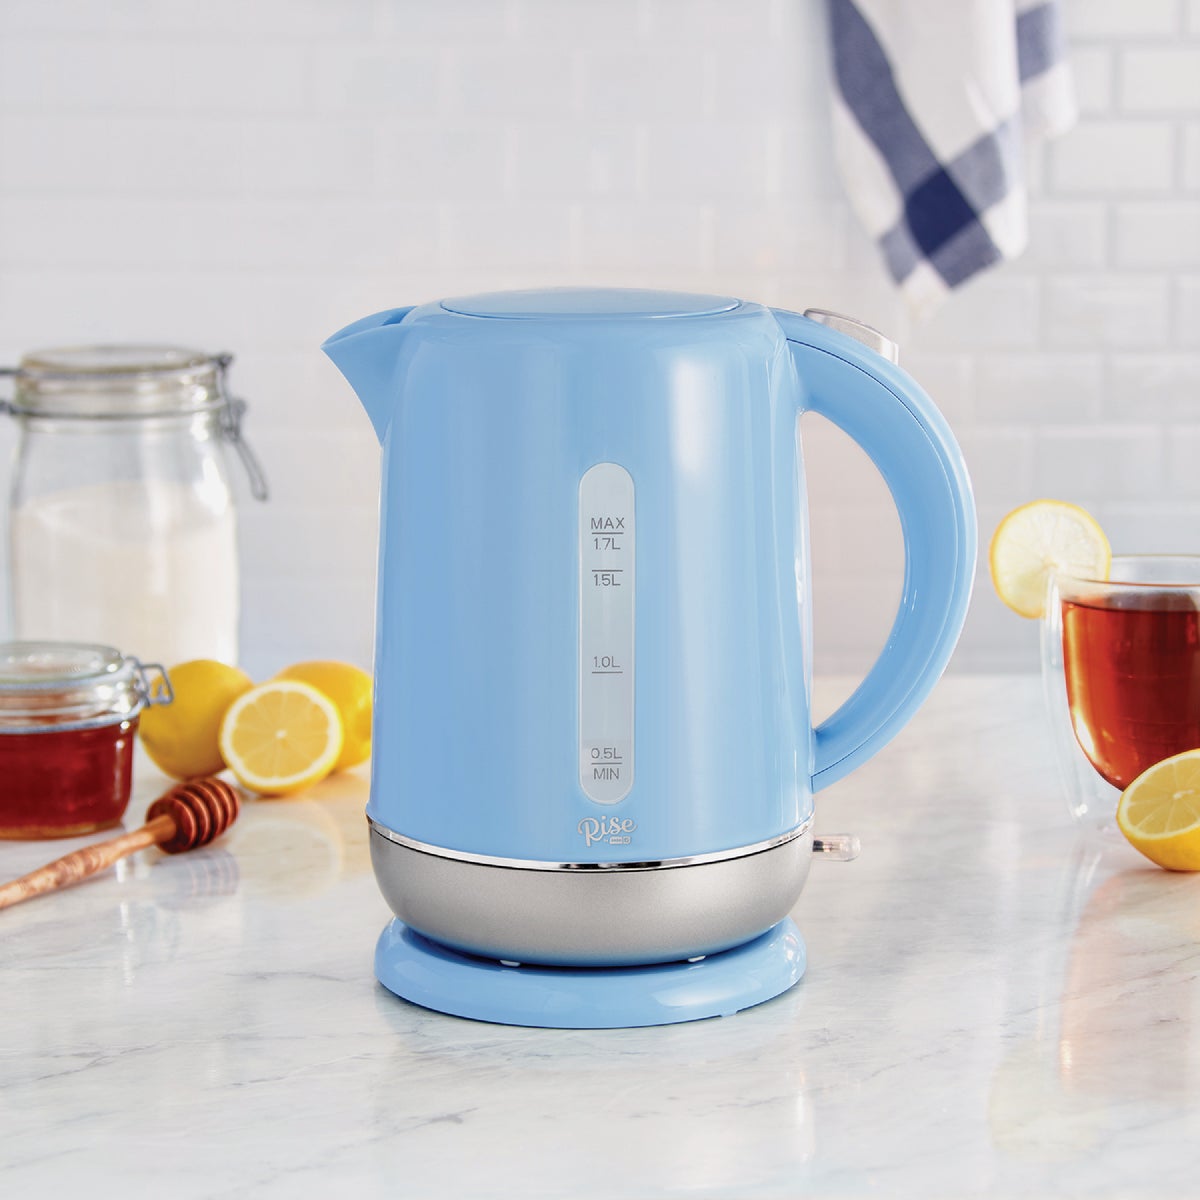 Rise By Dash 1.7 Ltr. Blue Sky Electric Kettle